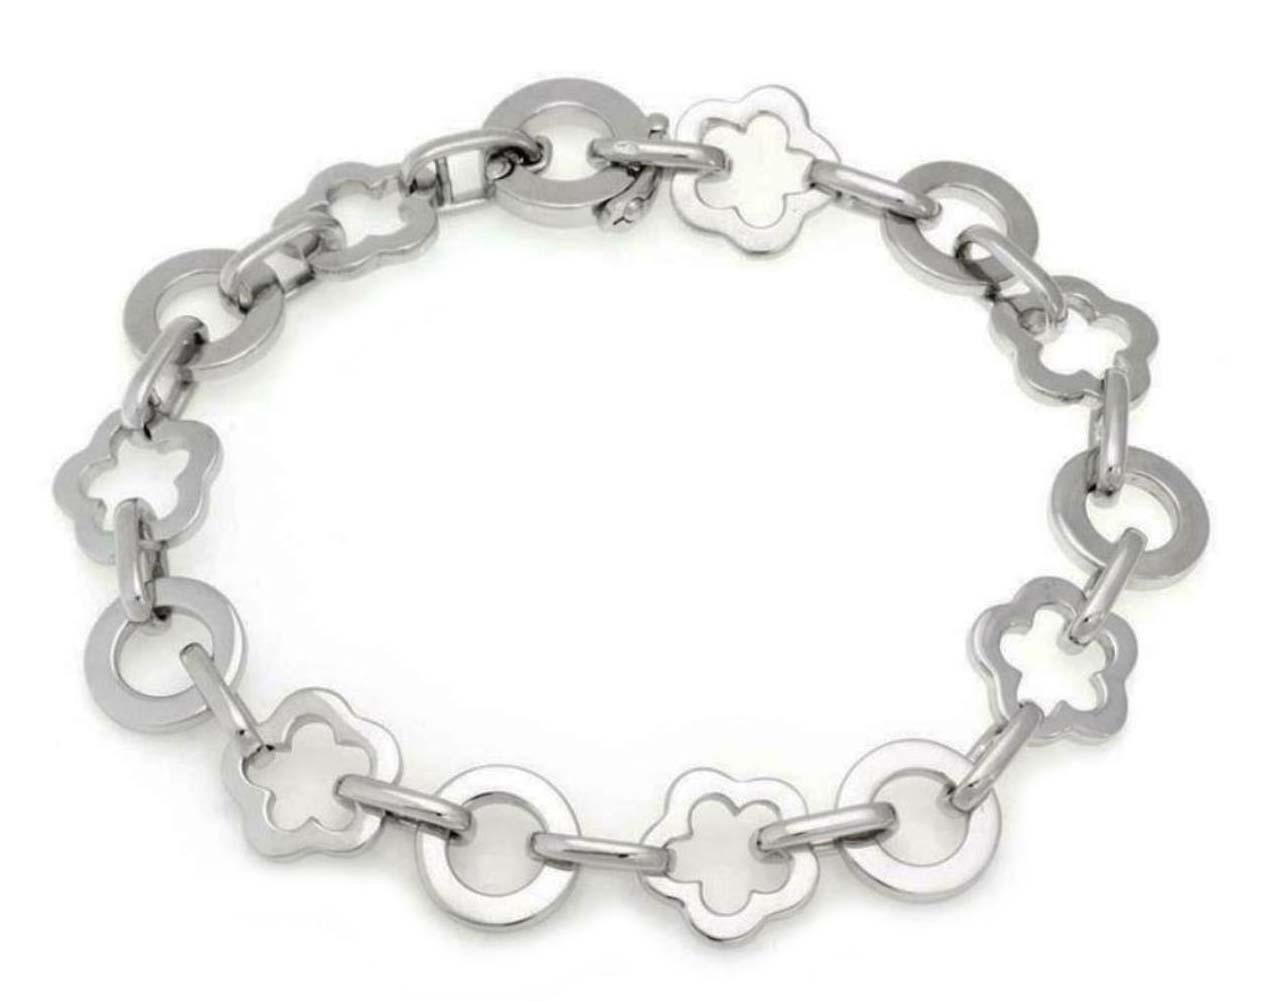 This elegant authentic bracelet is by Chanel from the Camellia collection. It is crafted from 18k white gold with a polished finish featuring alternating round and open camellia floral links, these are great for hanging your favorite charms. It